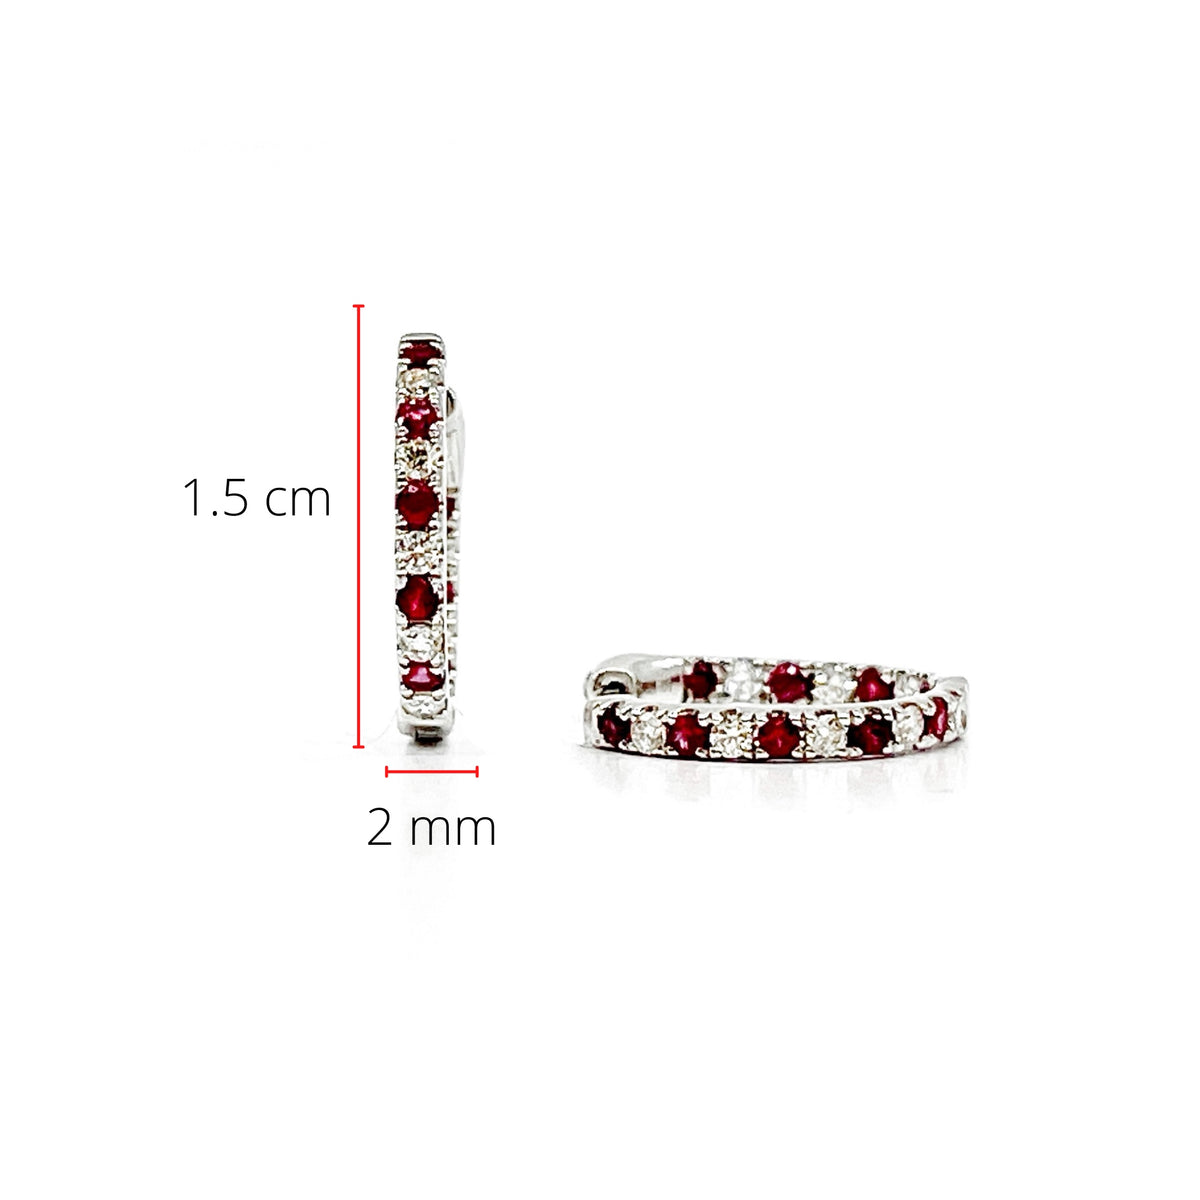 14K White Gold 0.39cttw Genuine Rubies and 0.25cttw Diamond Earrings - 15mm